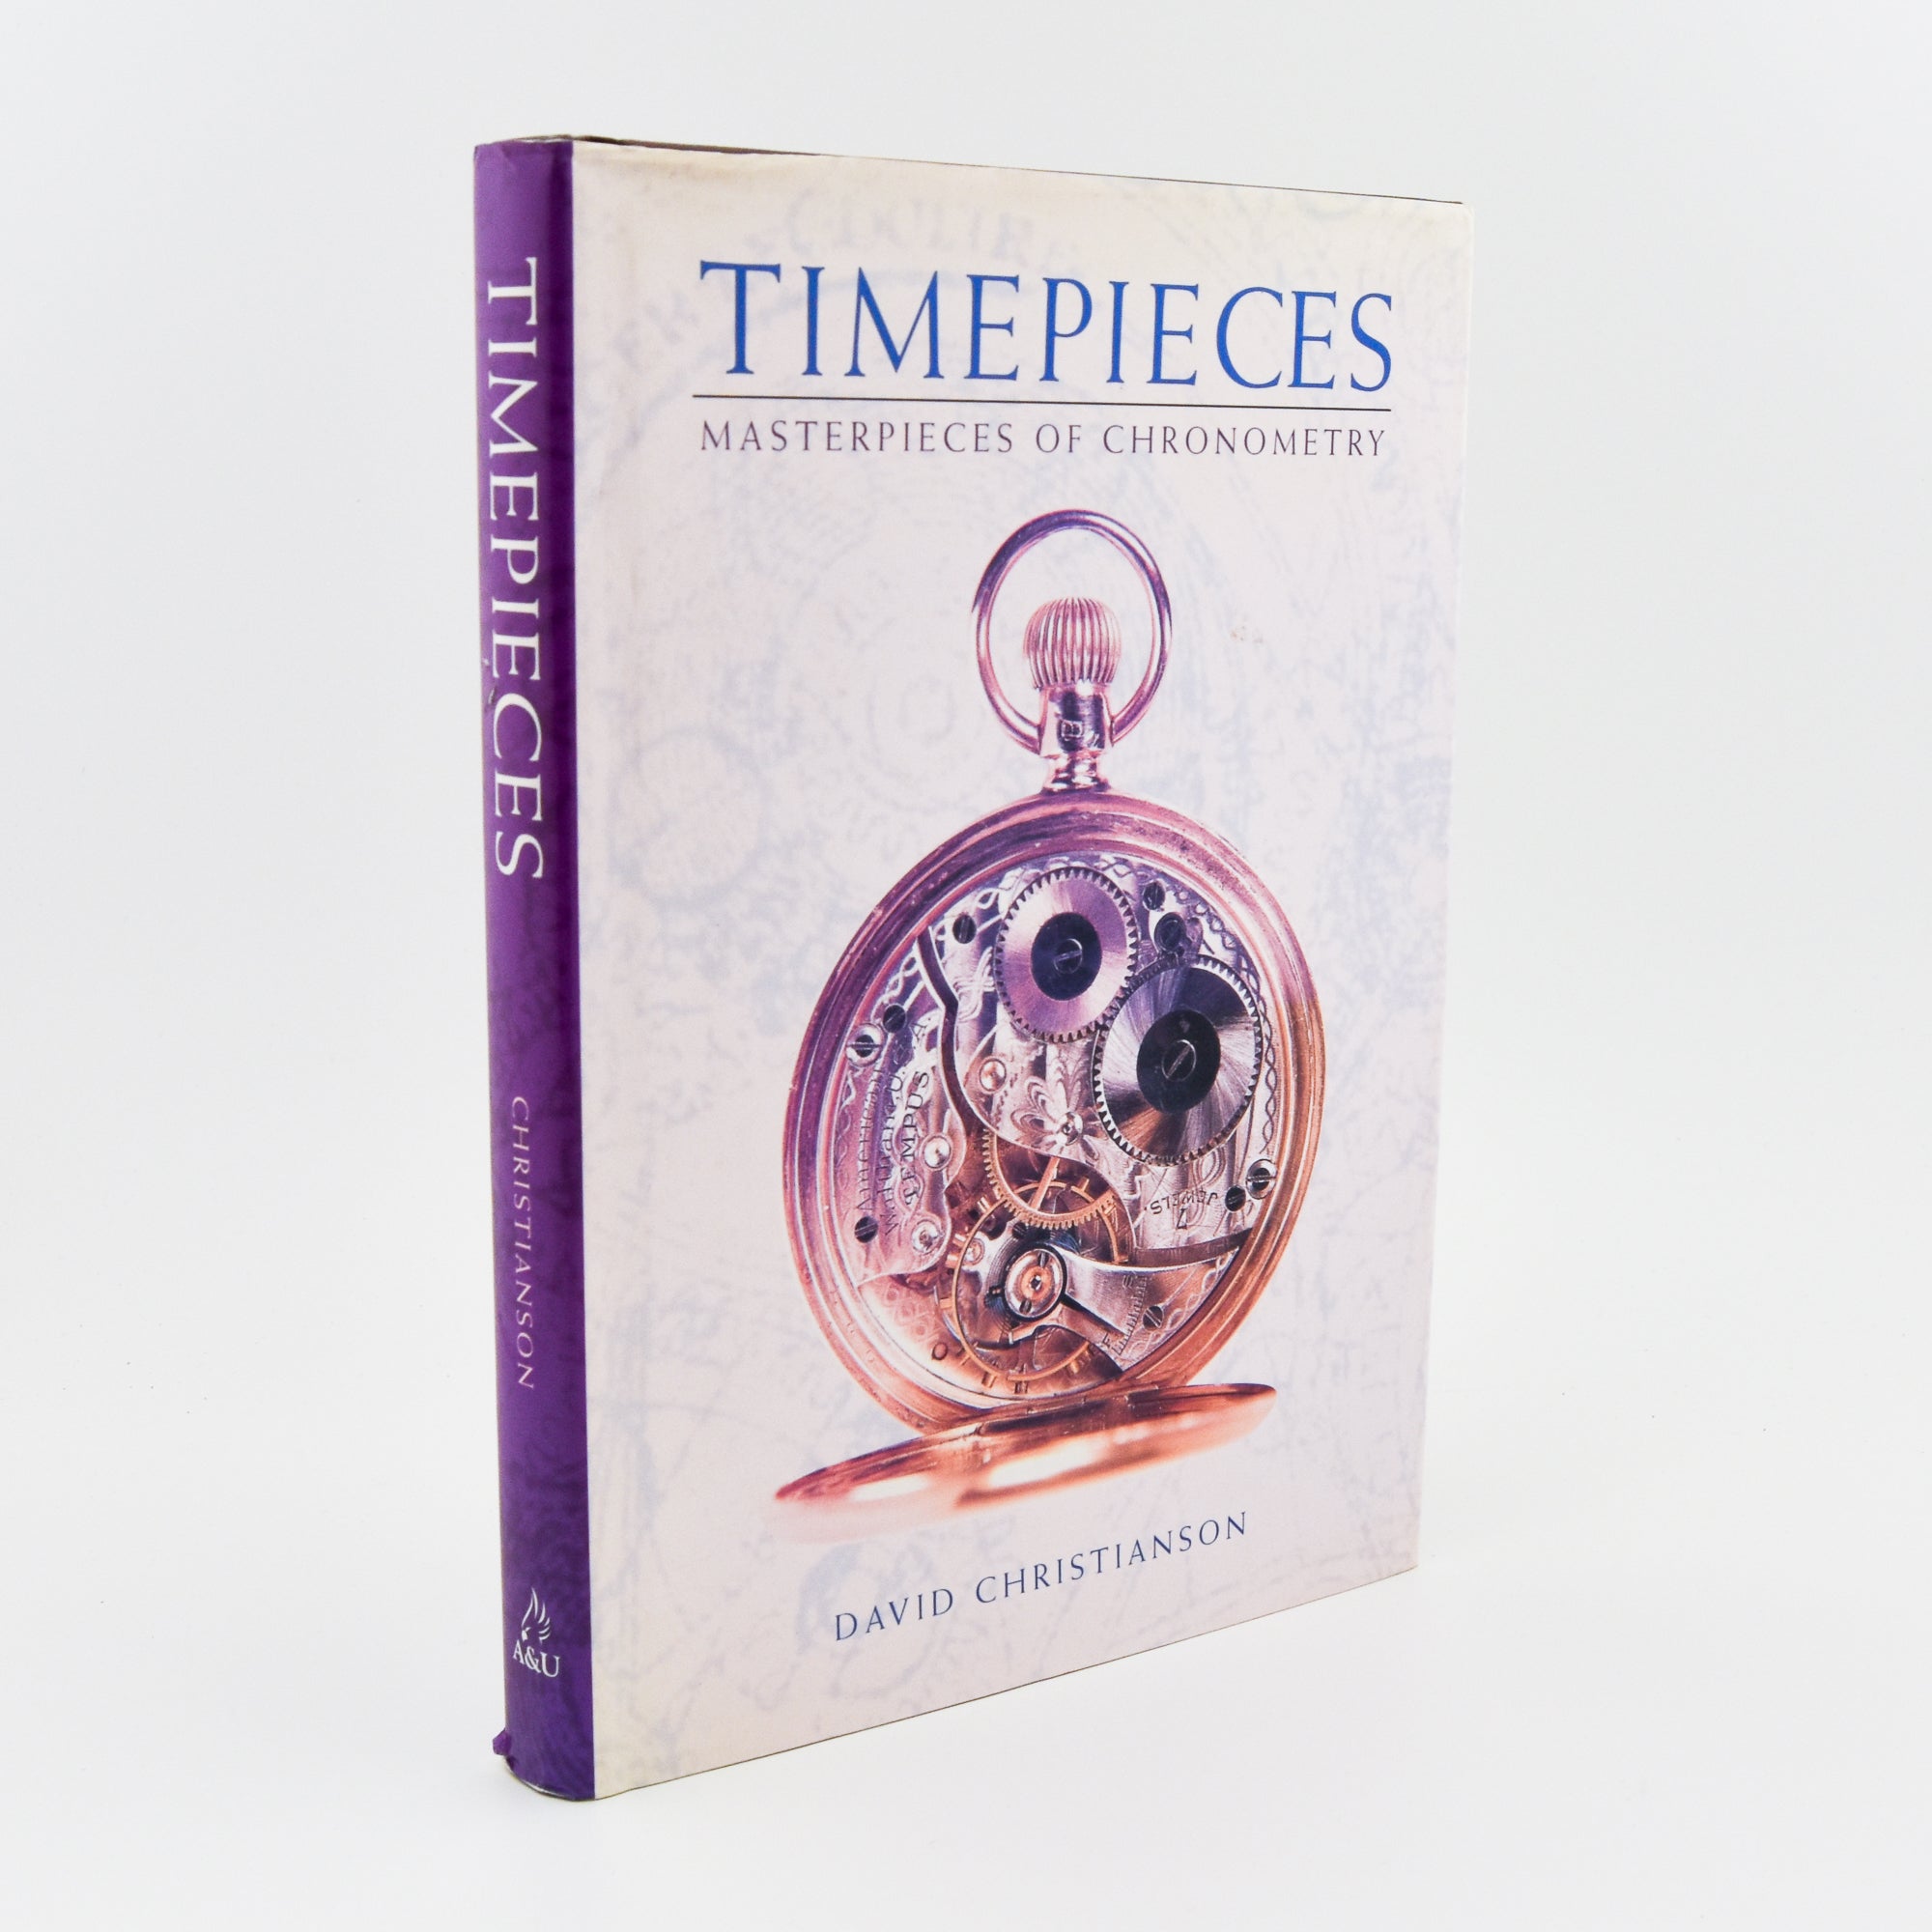 Timepieces, Masterpieces of Chronometry by David Christianson